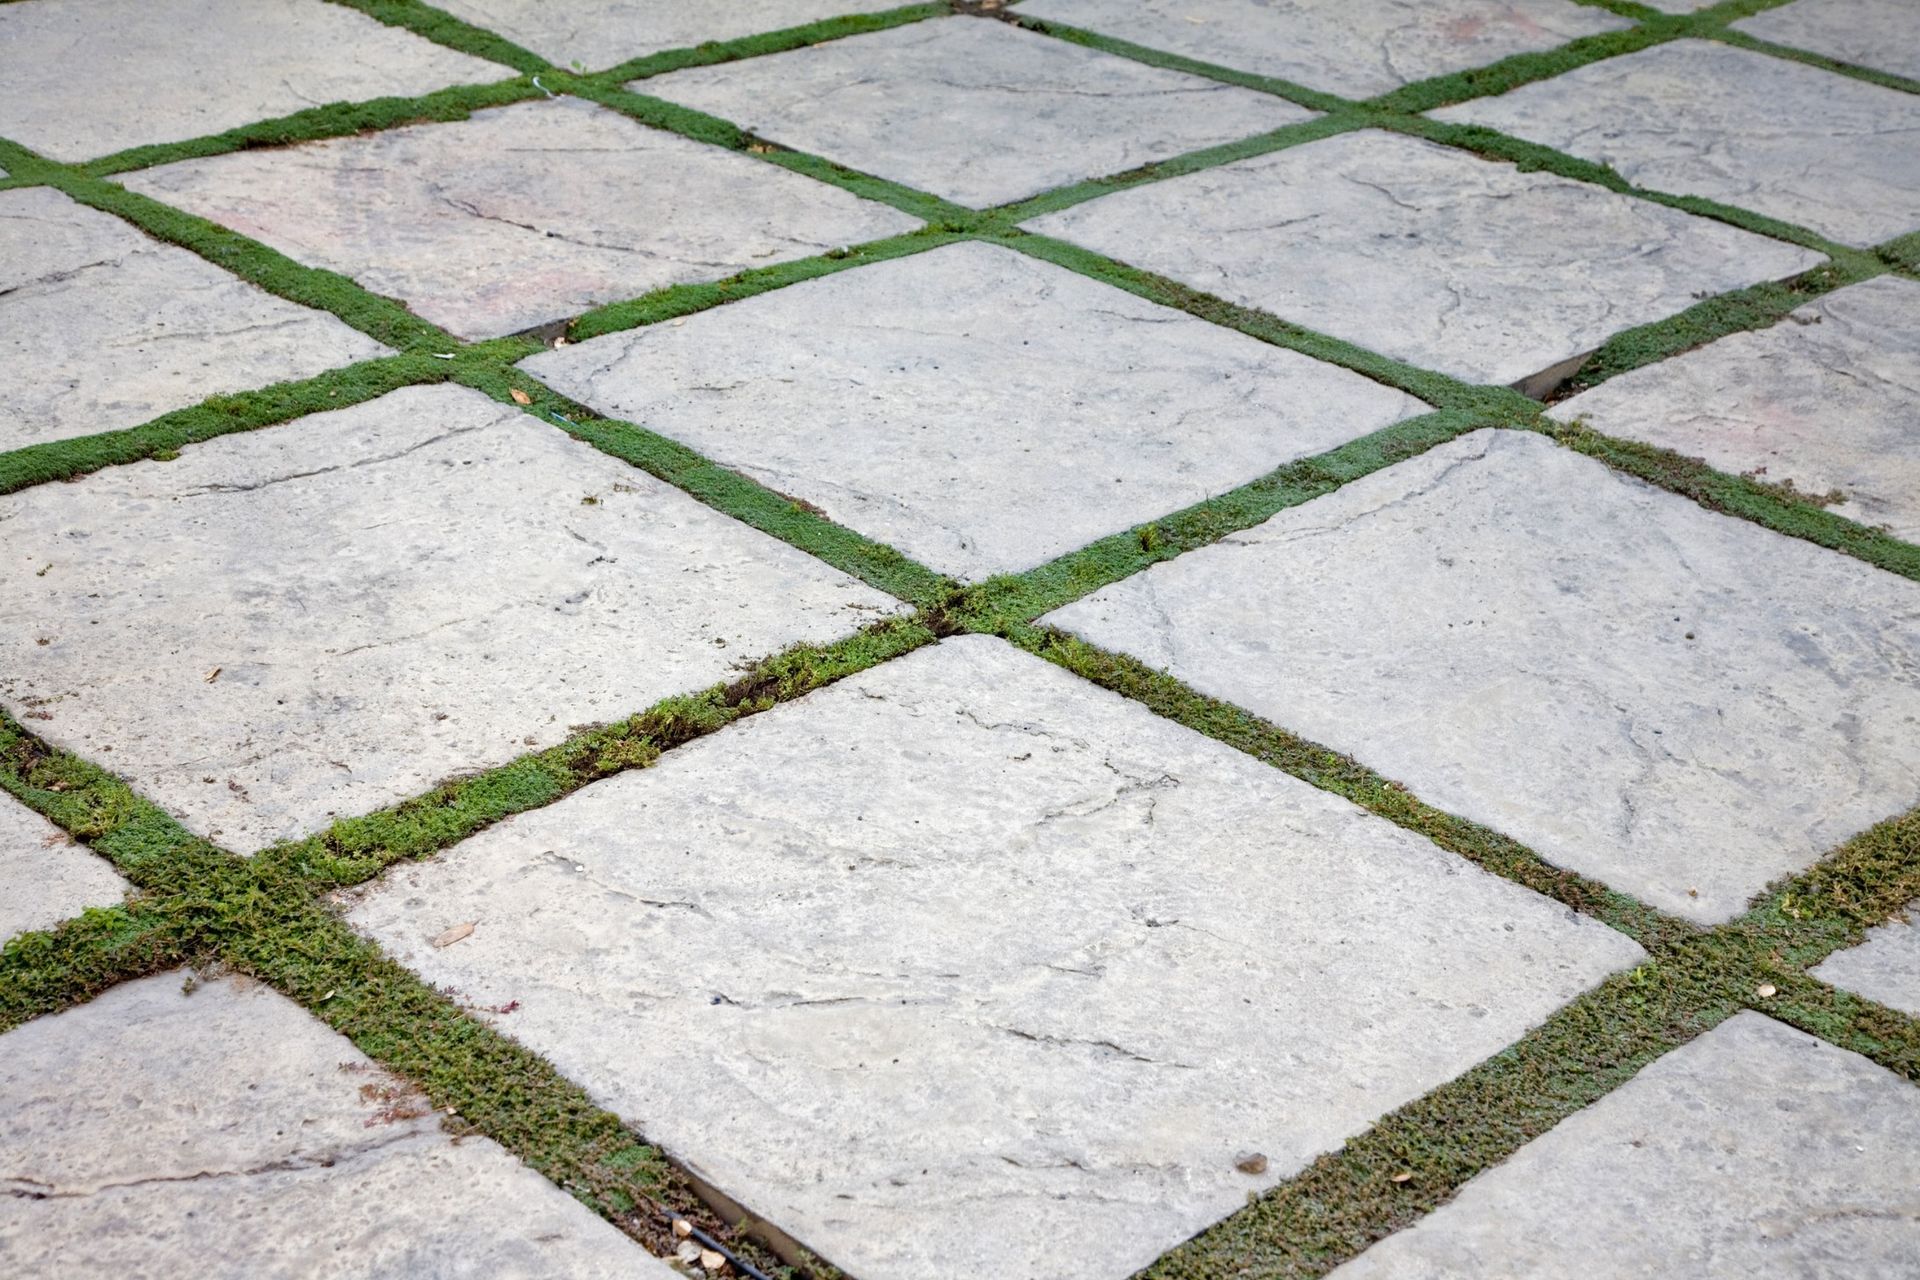 concrete pavers with grass installed between each